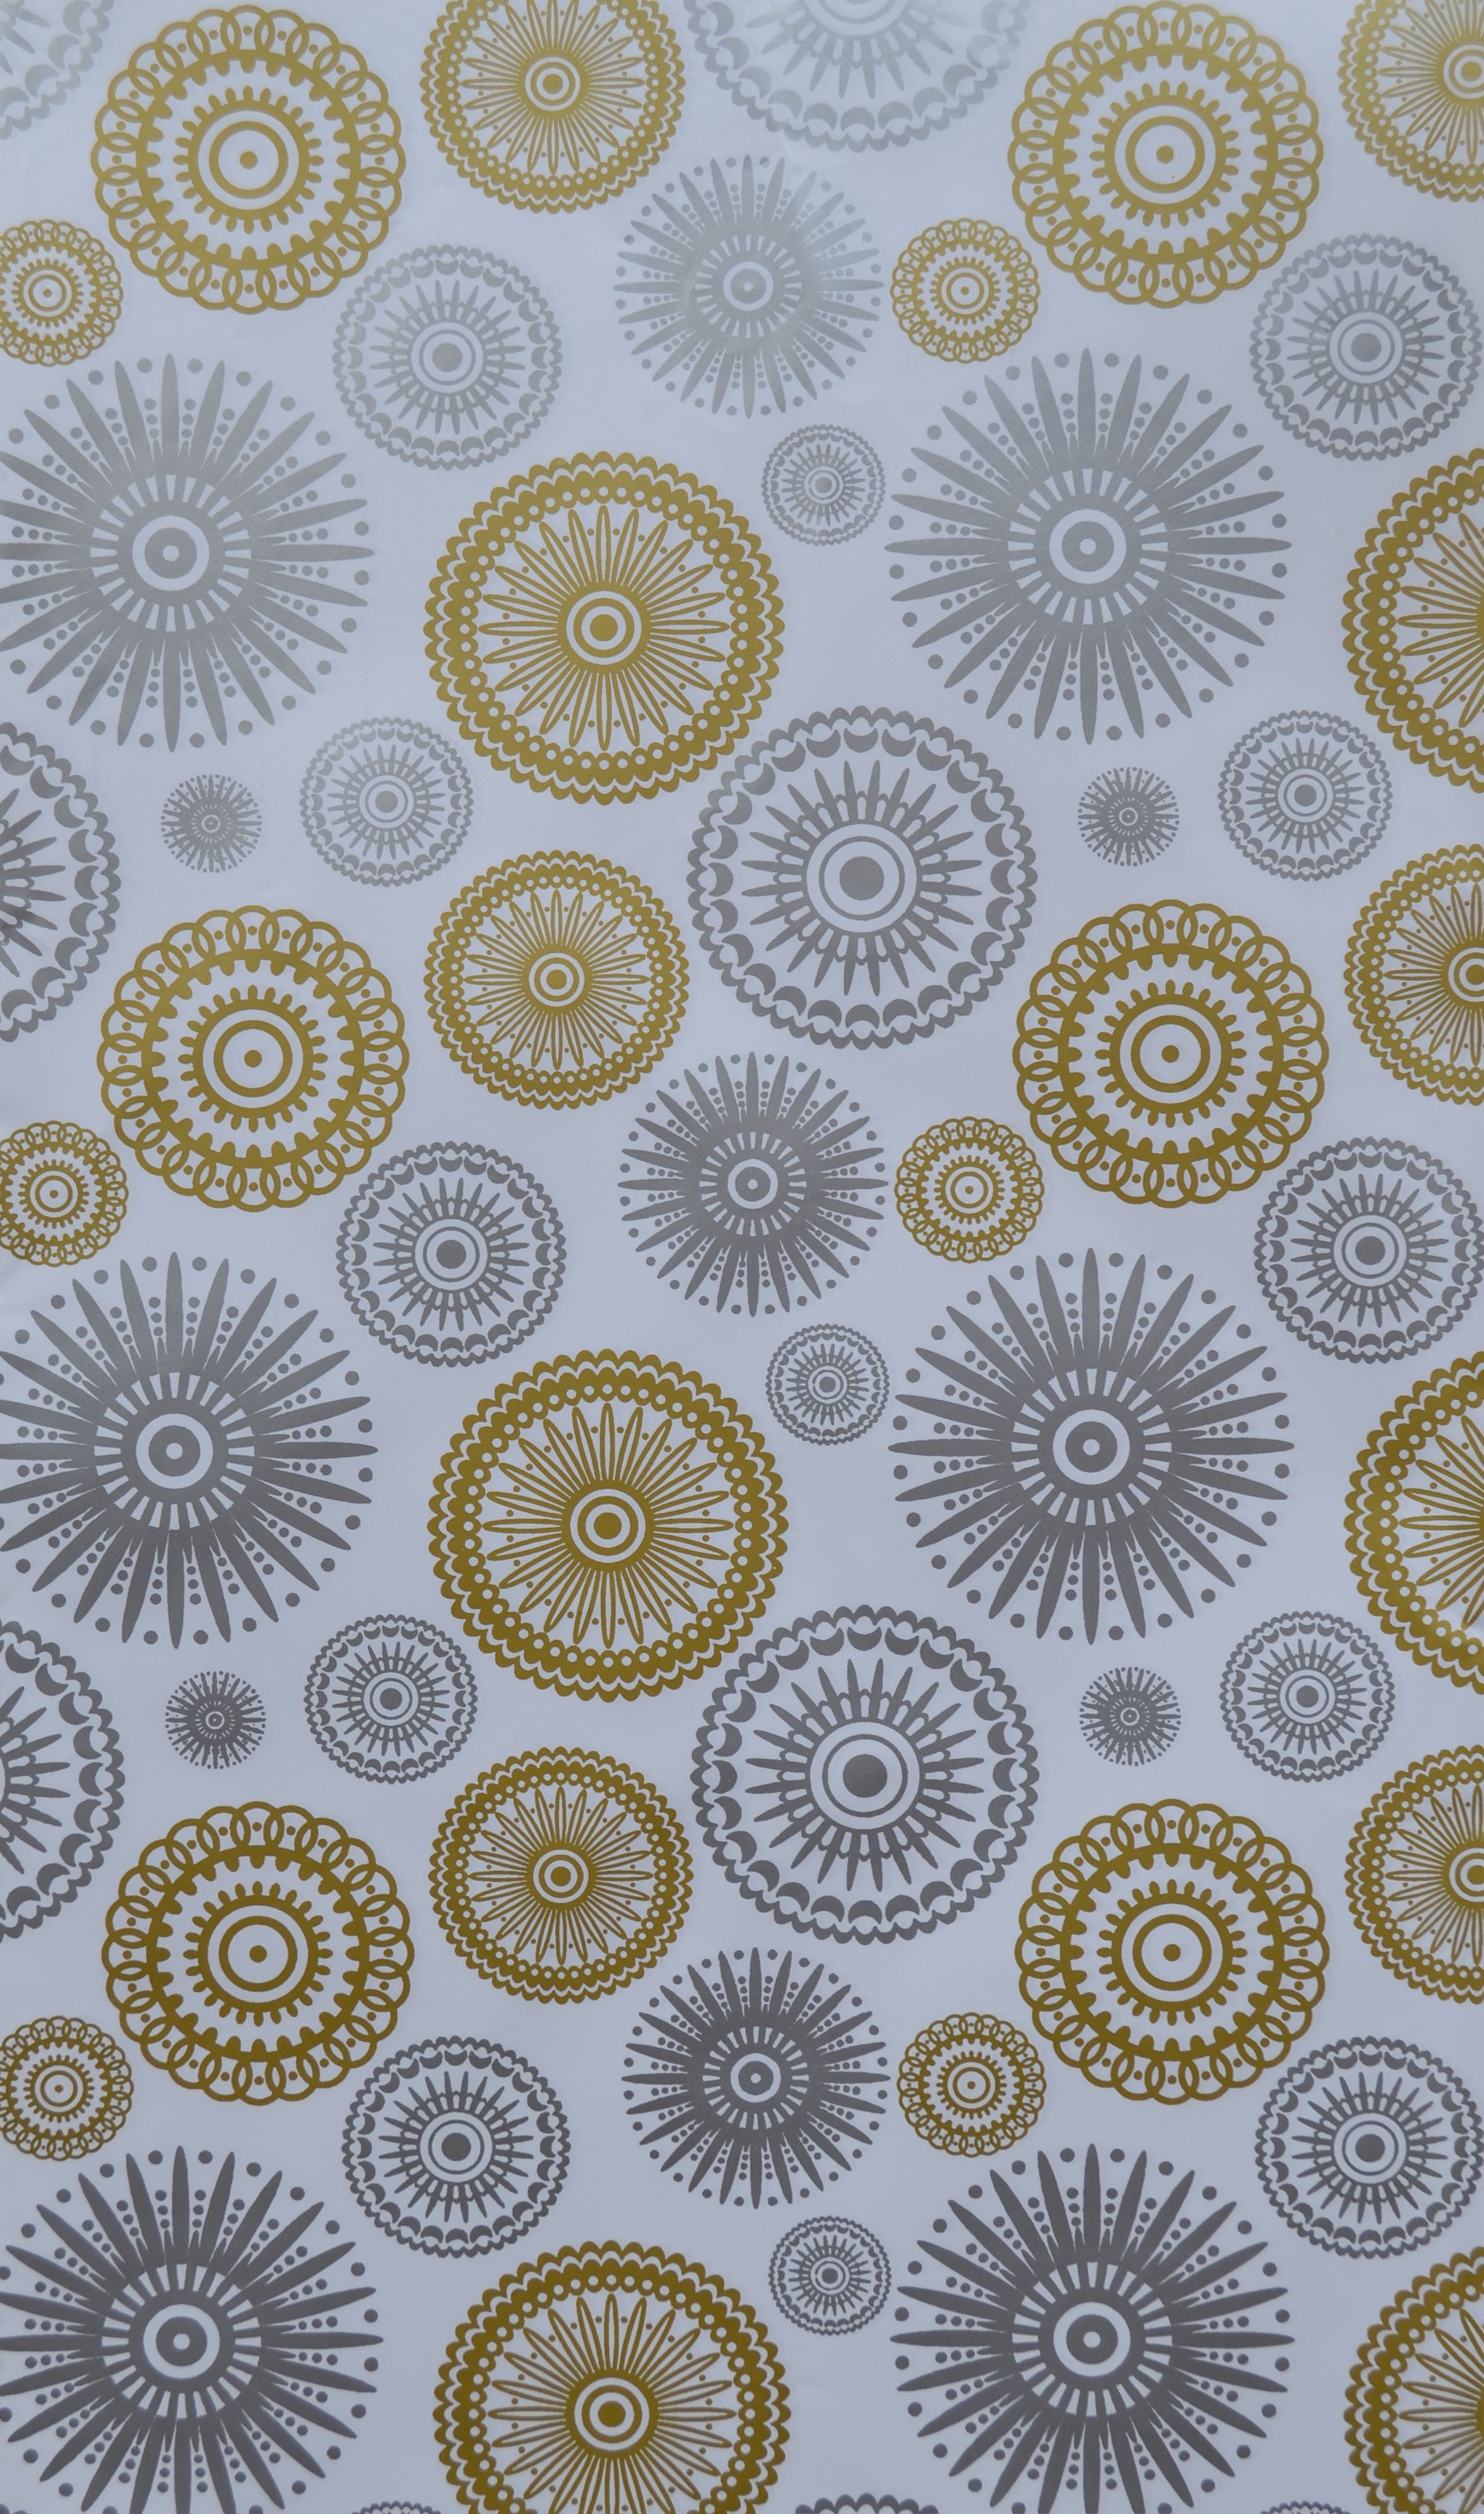 Babeez | Gift wrapping Paper (Big Circles Design in Silver and Gold) undefined